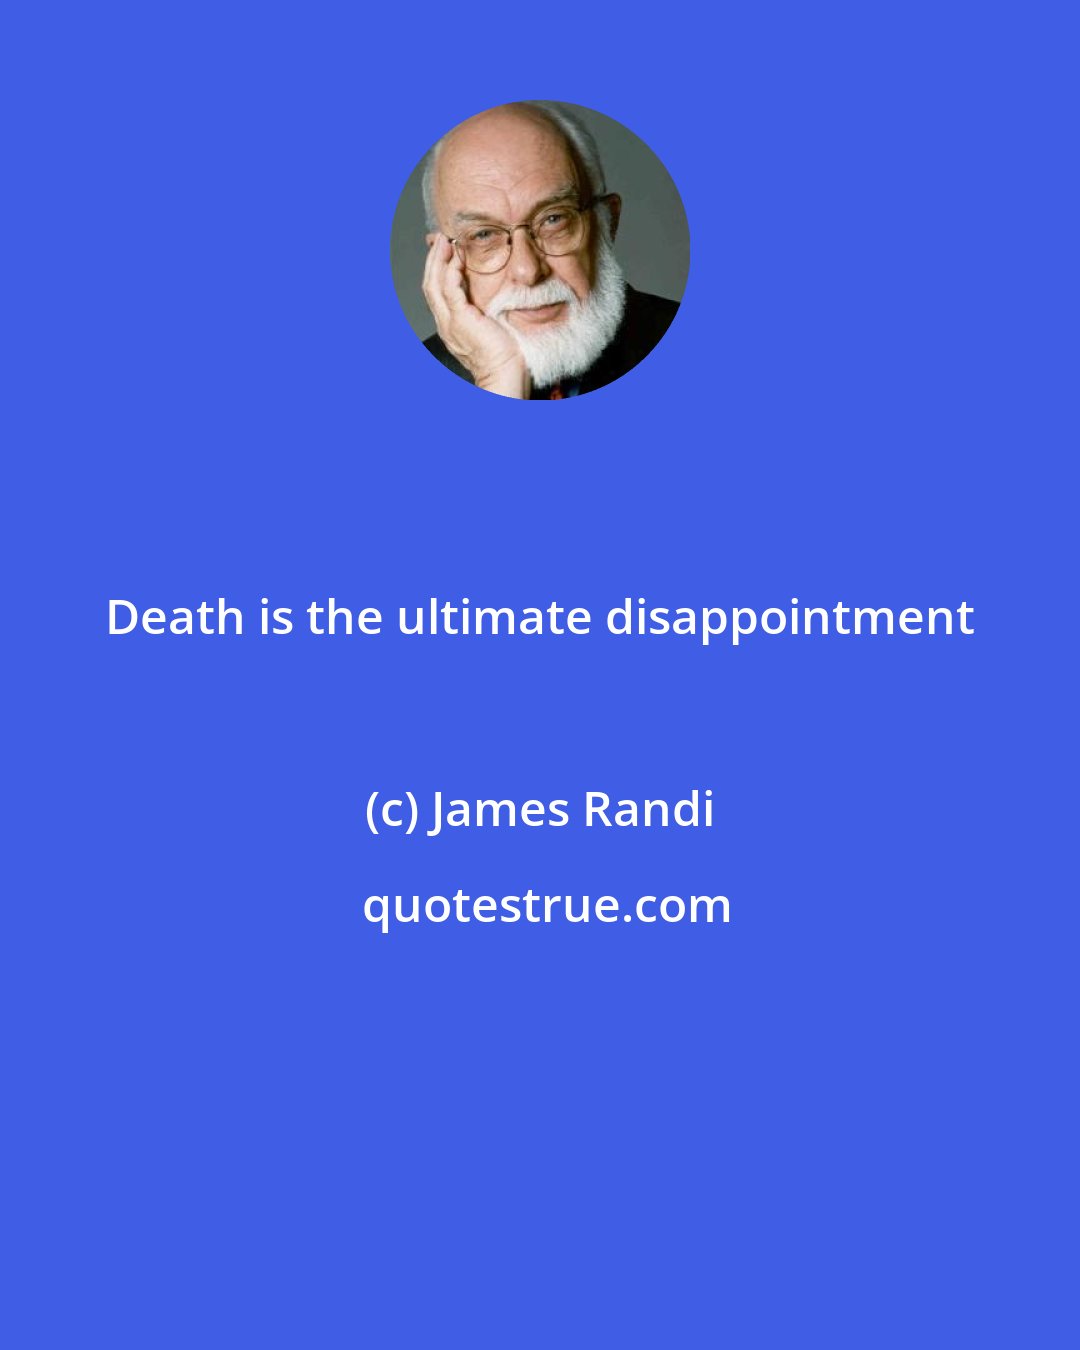 James Randi: Death is the ultimate disappointment